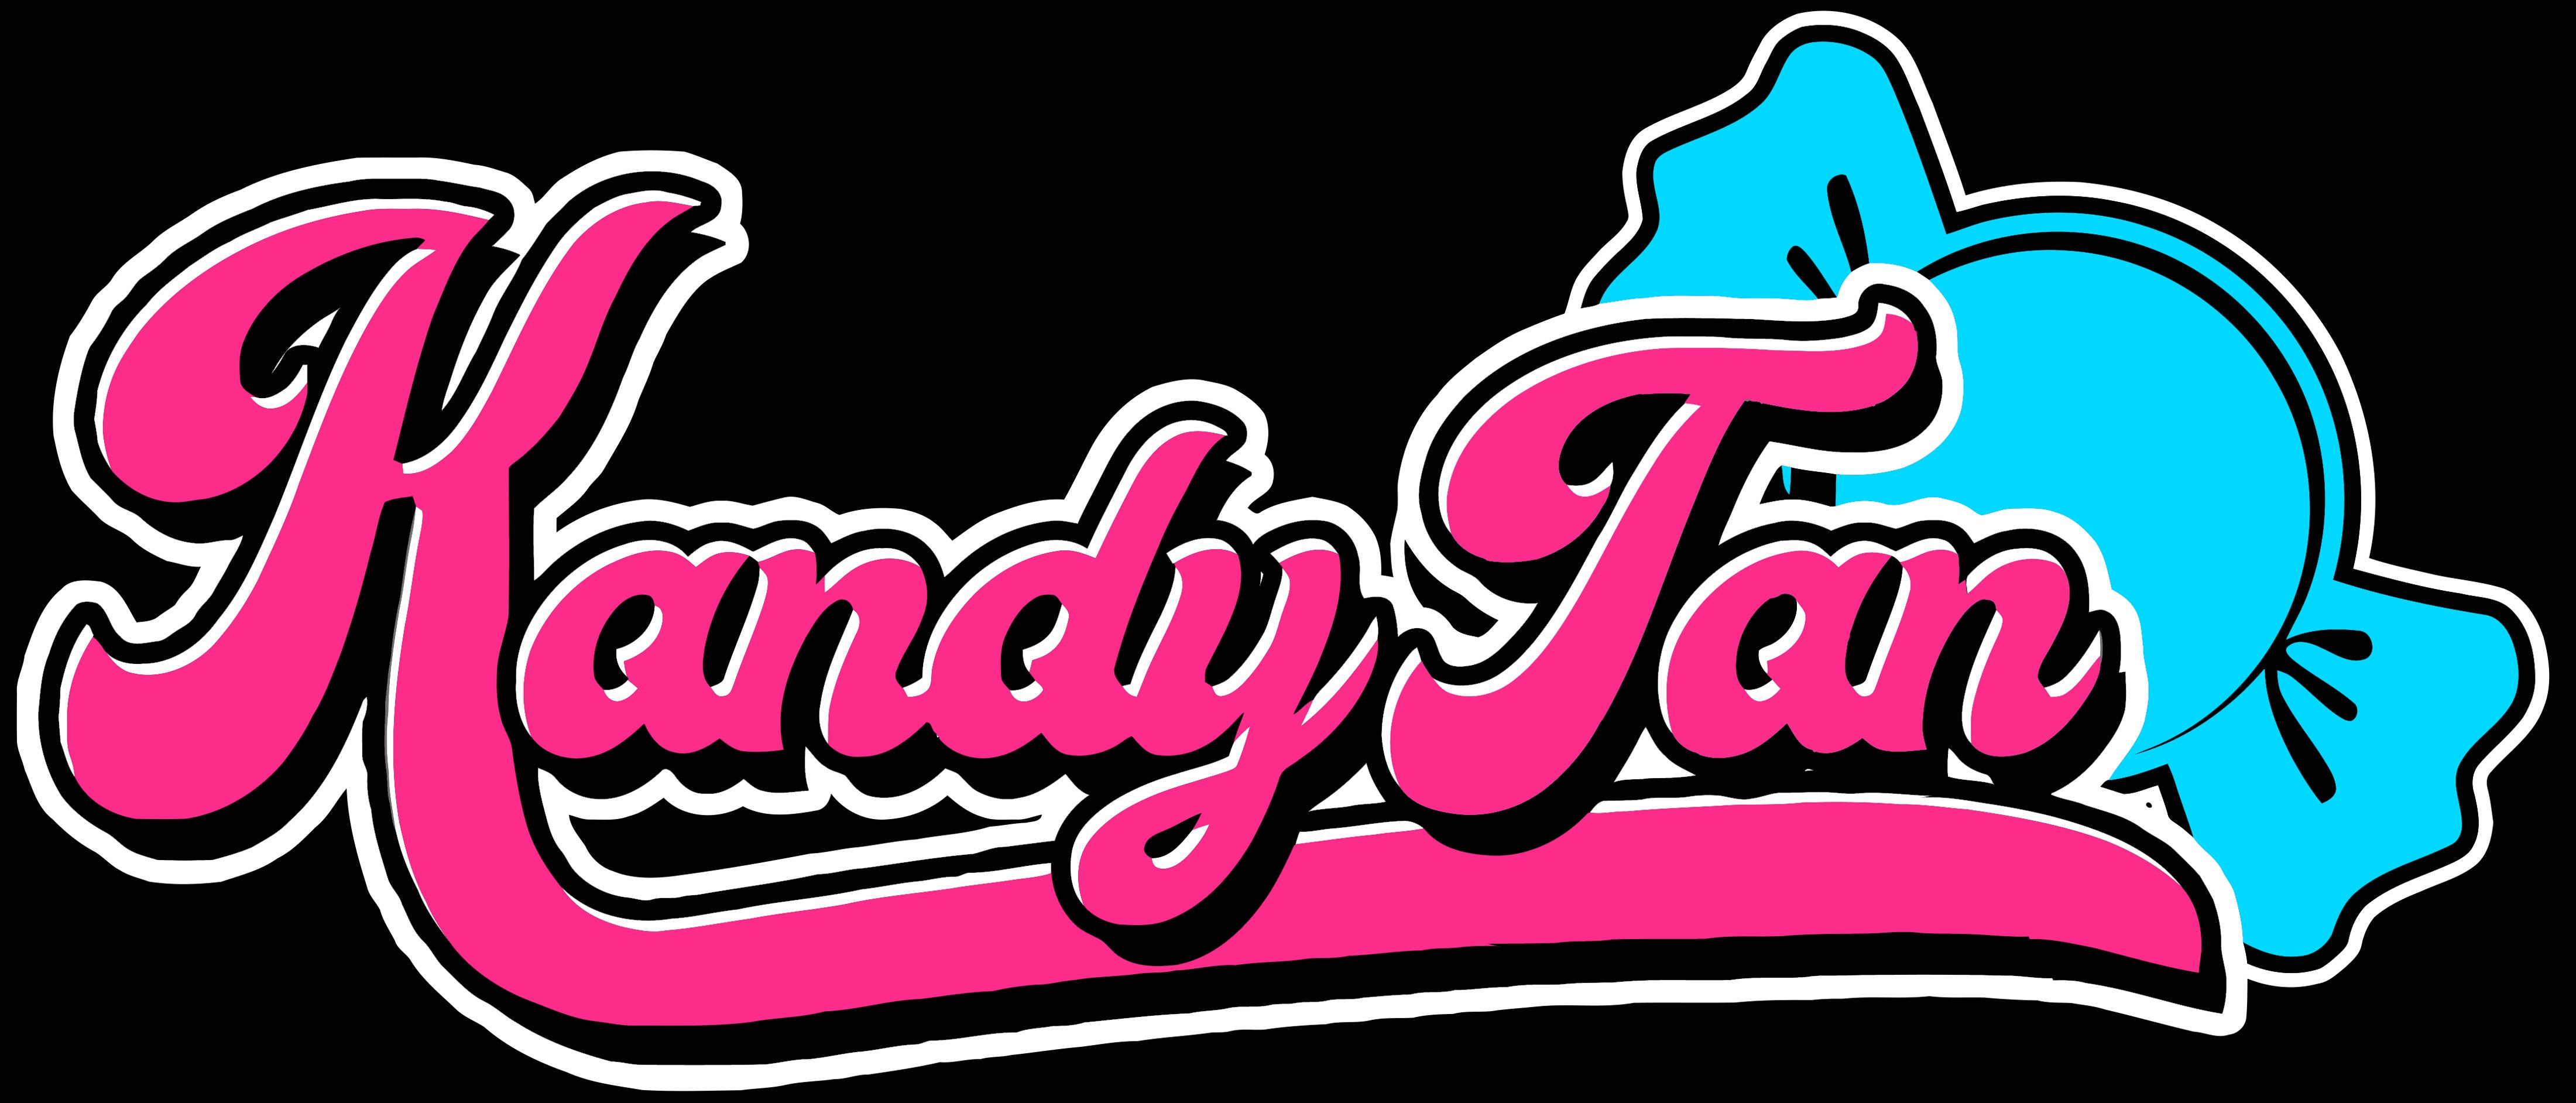 Kandy tans logo with blue candy flavoured sweet